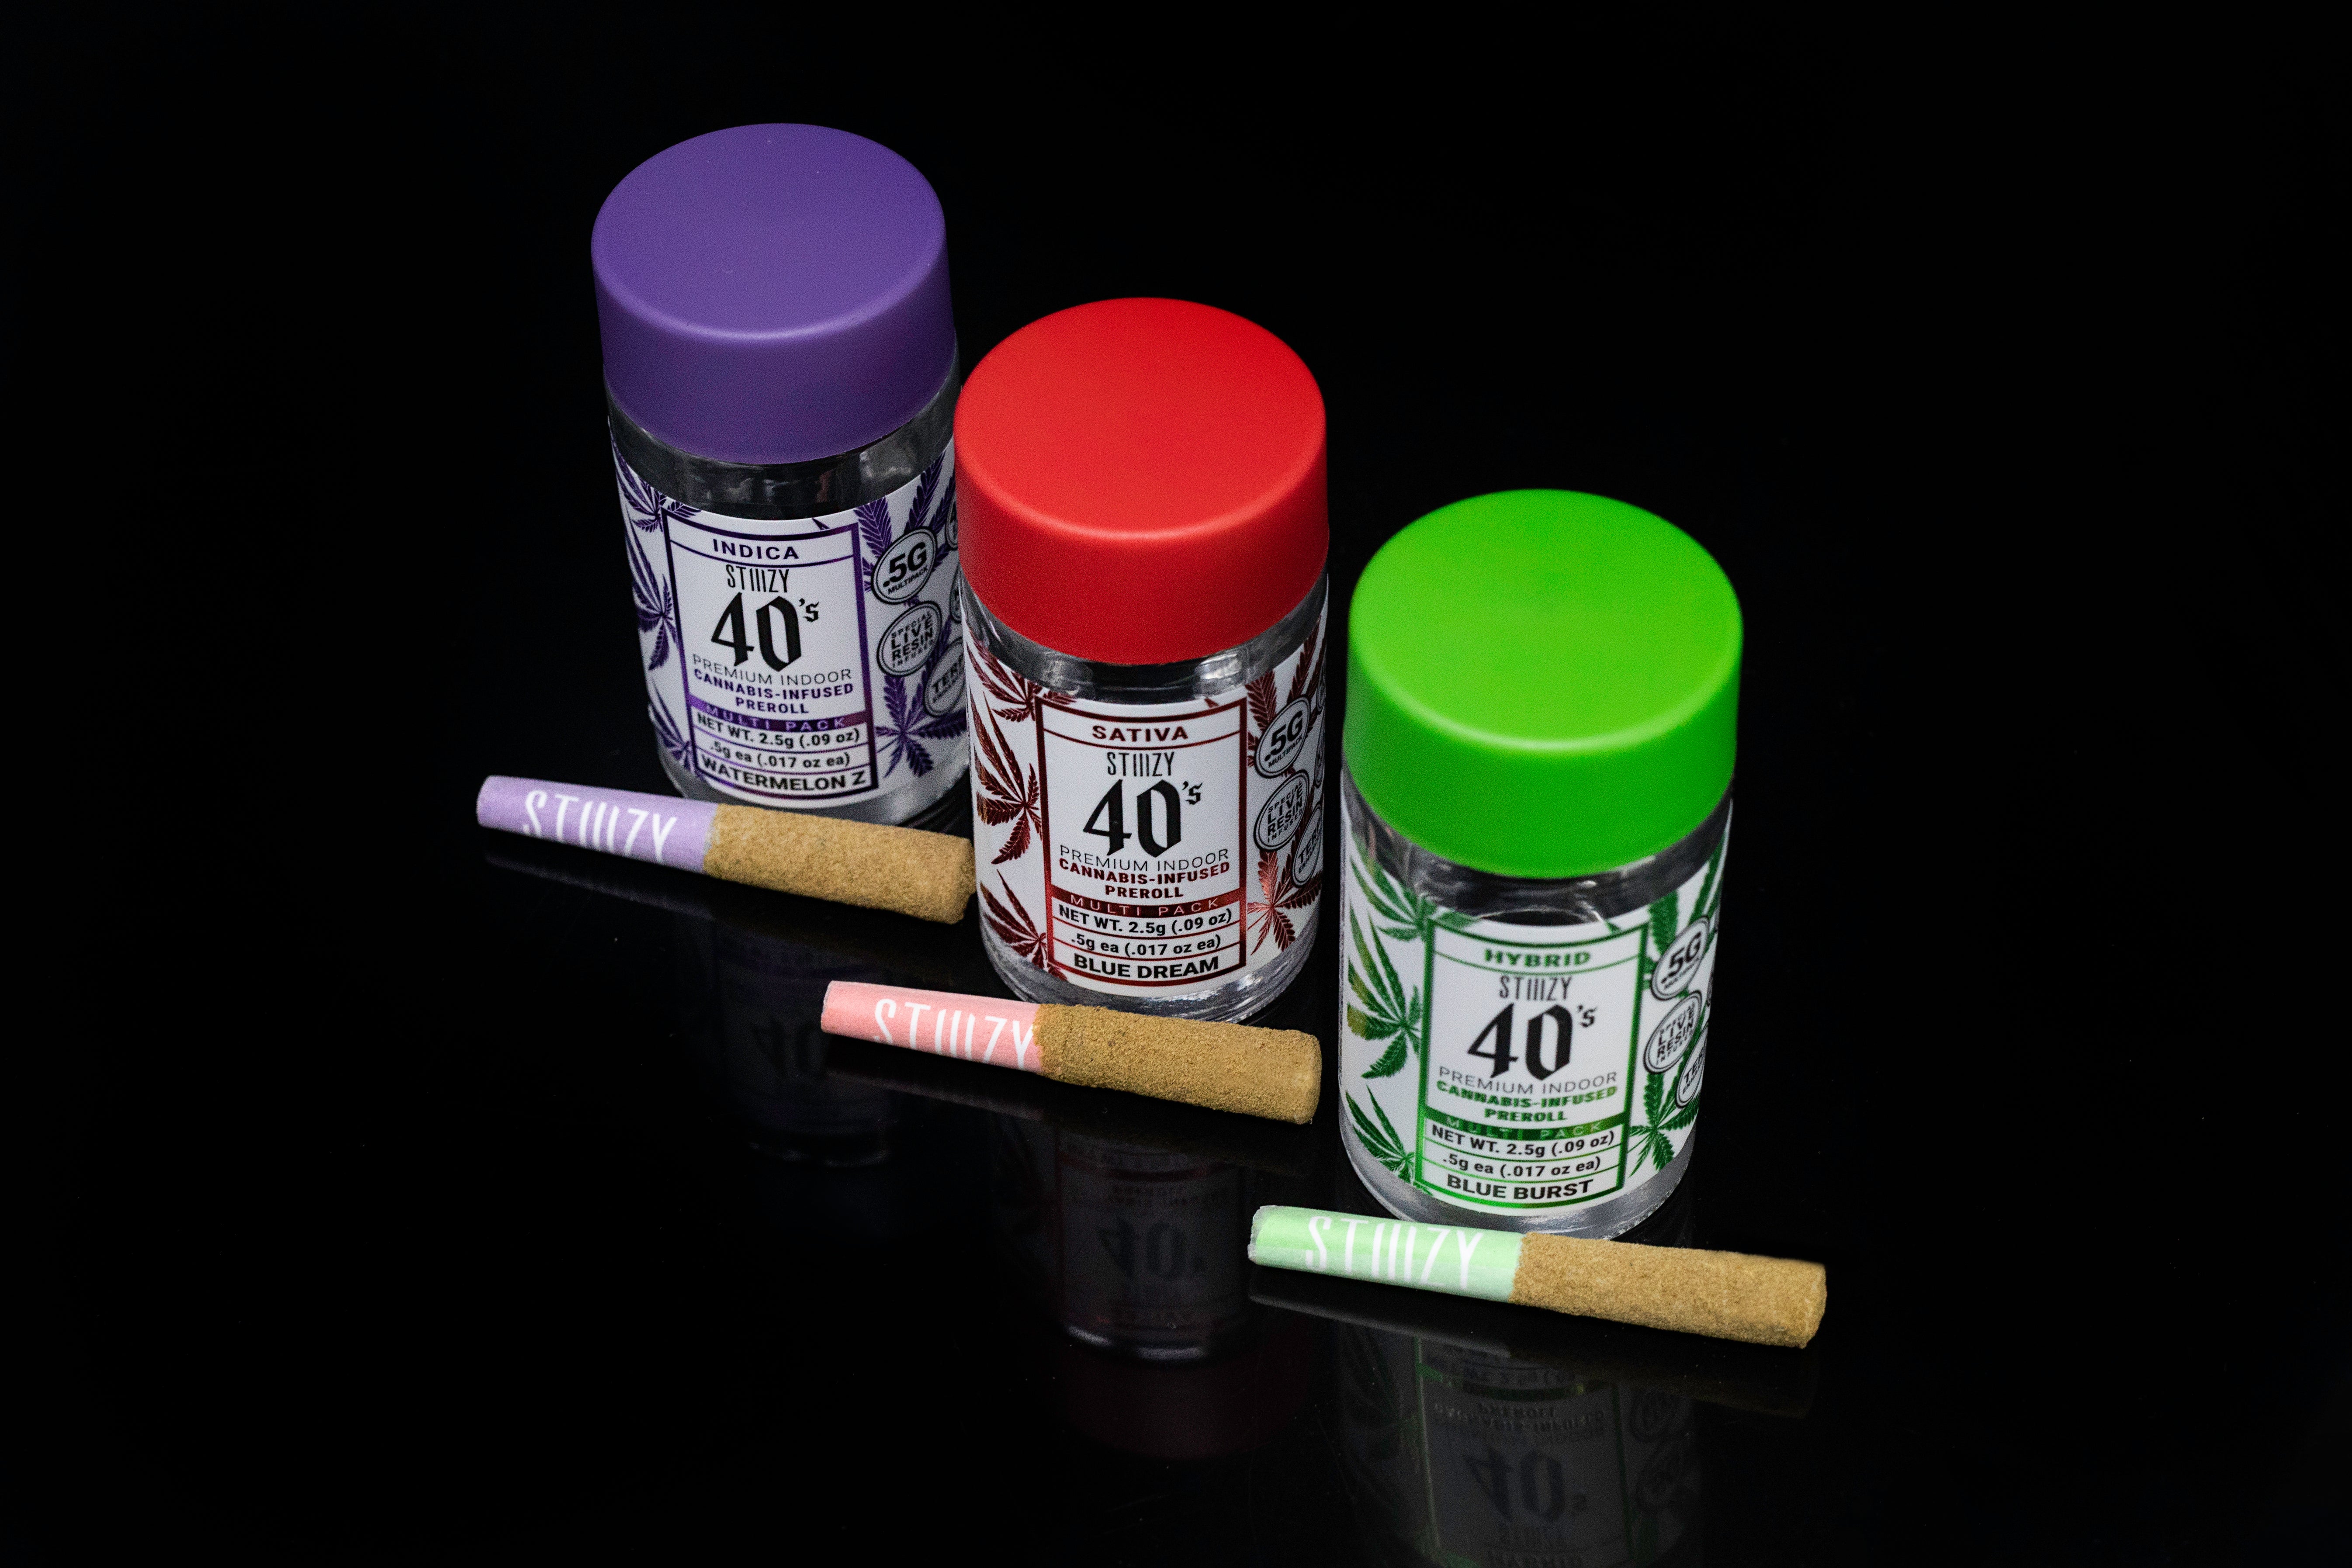 Three infused pre-rolls made from either hybrid, indica, or sativa cannabis flower, lie in front of their jars.